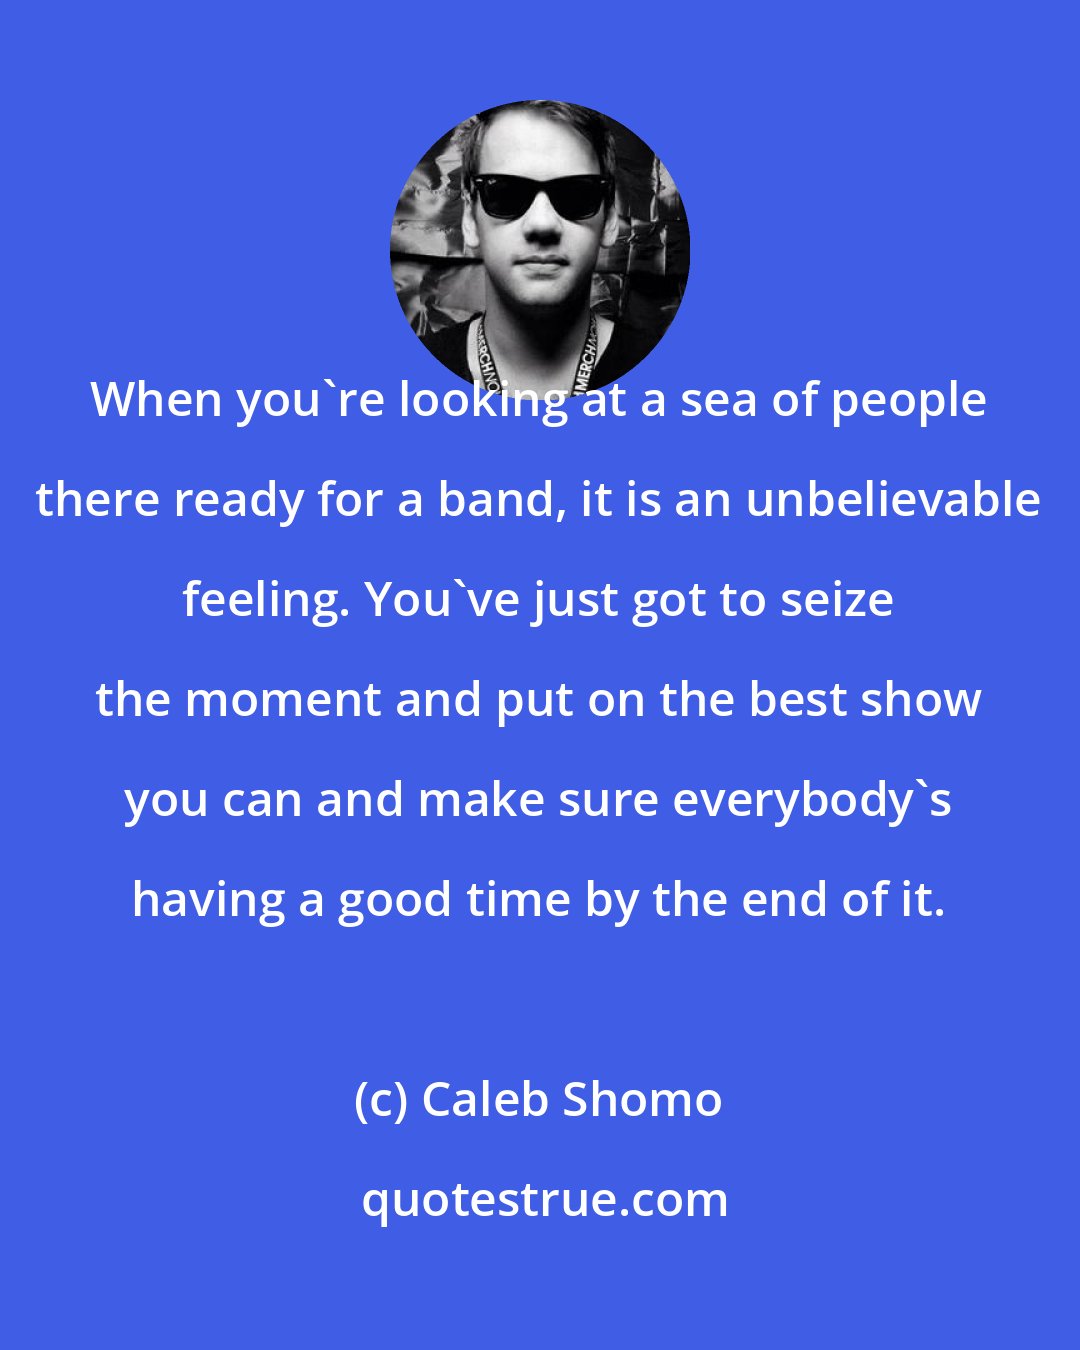 Caleb Shomo: When you're looking at a sea of people there ready for a band, it is an unbelievable feeling. You've just got to seize the moment and put on the best show you can and make sure everybody's having a good time by the end of it.